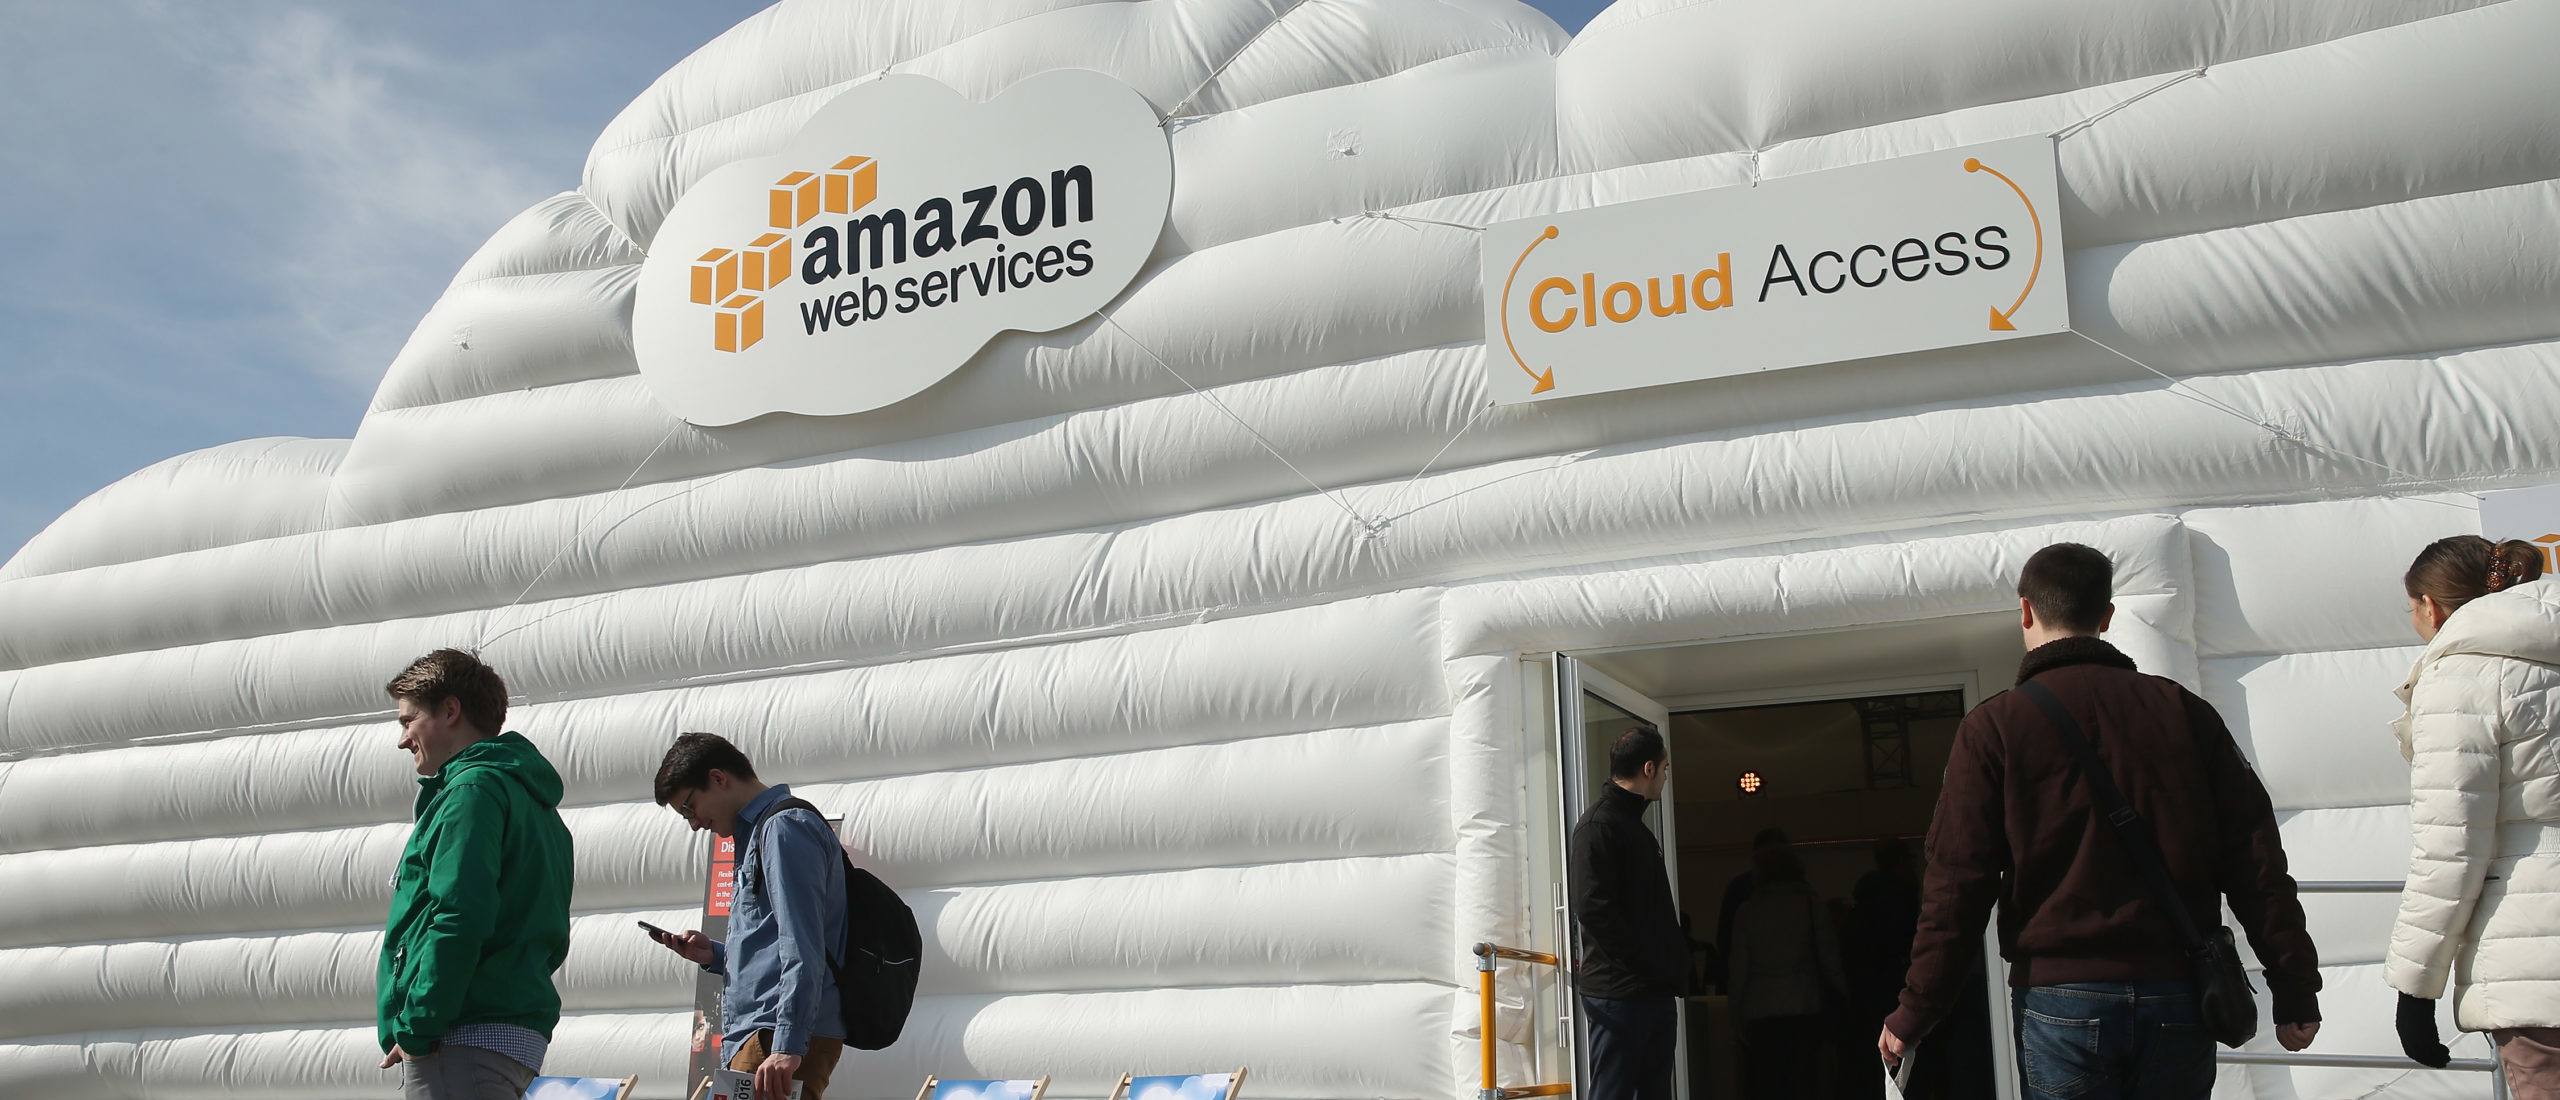 Visitors arrive at the cloud pavillion of Amazon Web Services at the 2016 CeBIT digital technology trade fair. (Photo by Sean Gallup/Getty Images)